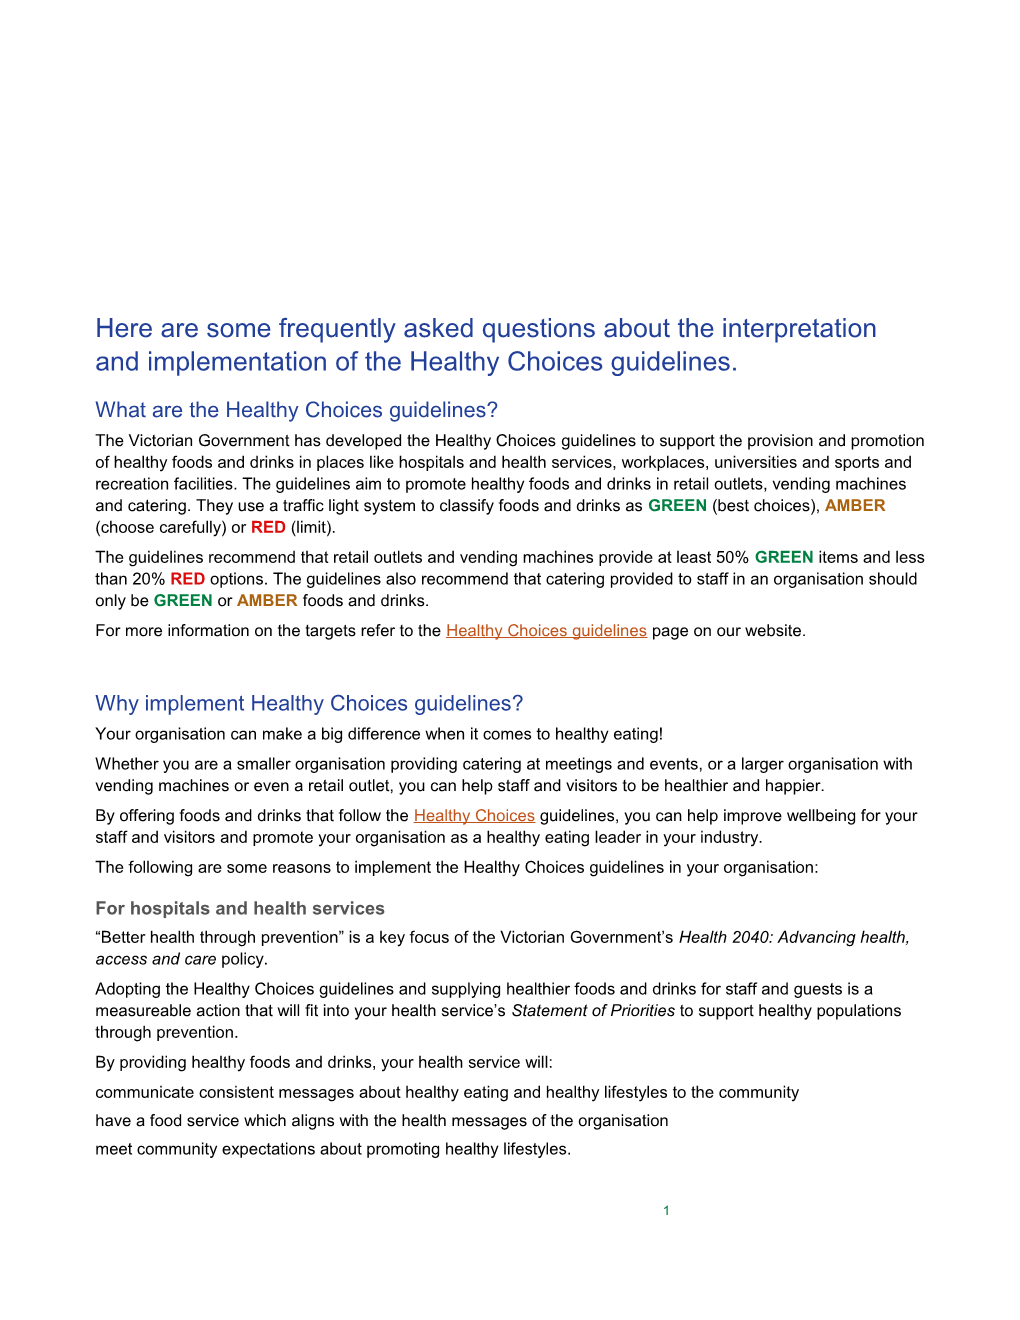 Here Are Some Frequently Asked Questions About the Interpretation and Implementation Of